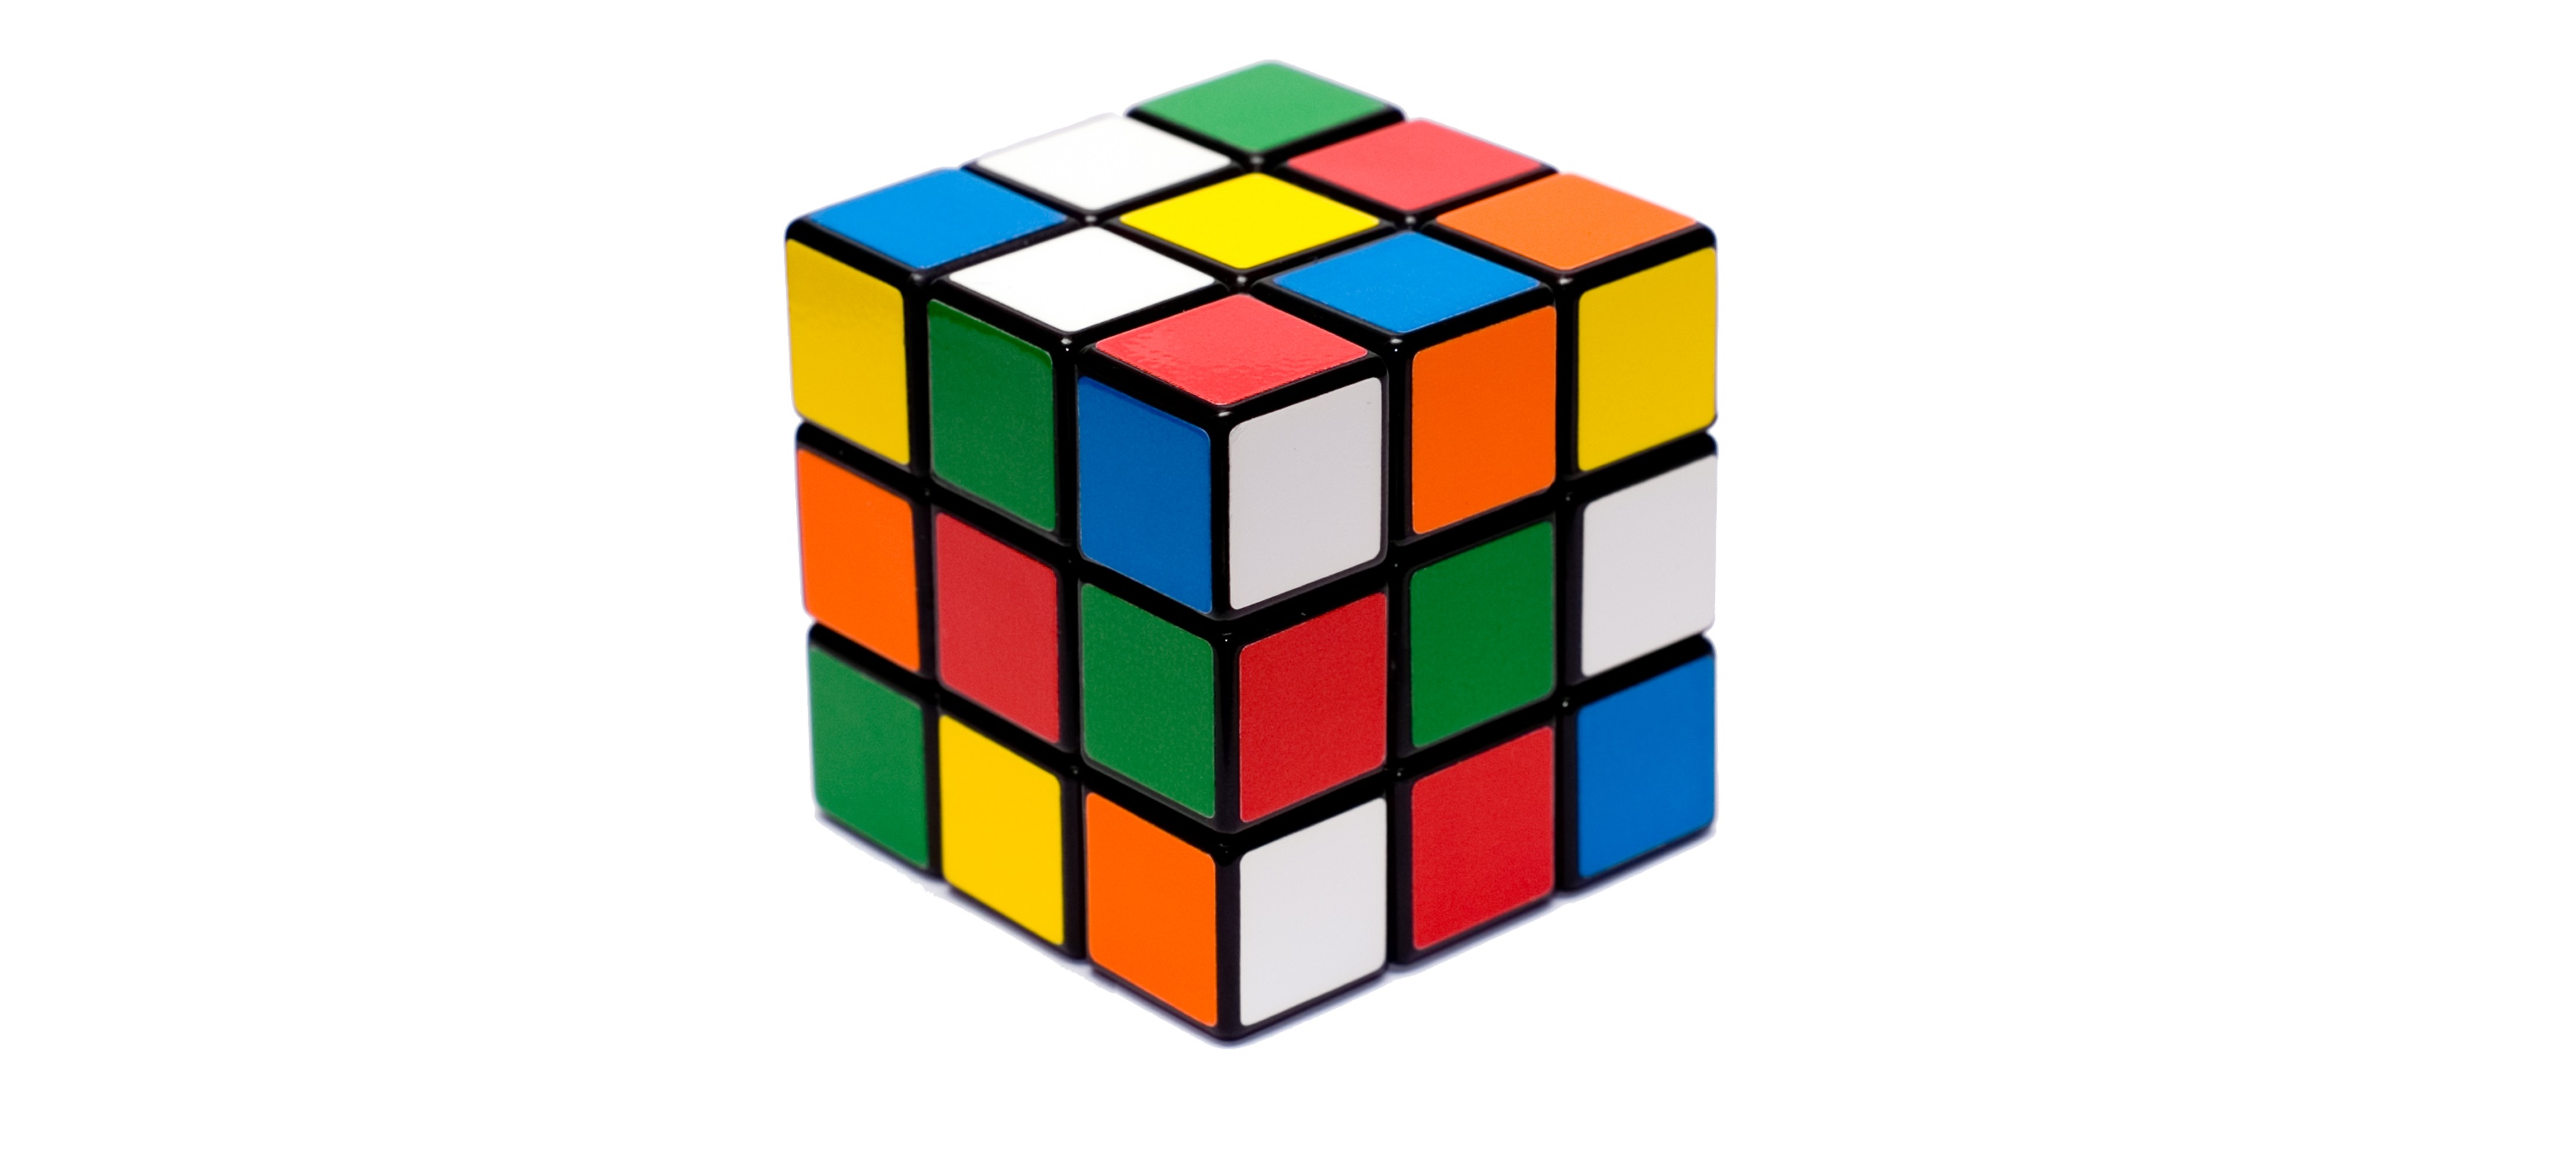 The Rubik's Cube Solves Any Paradox – Steve Patterson